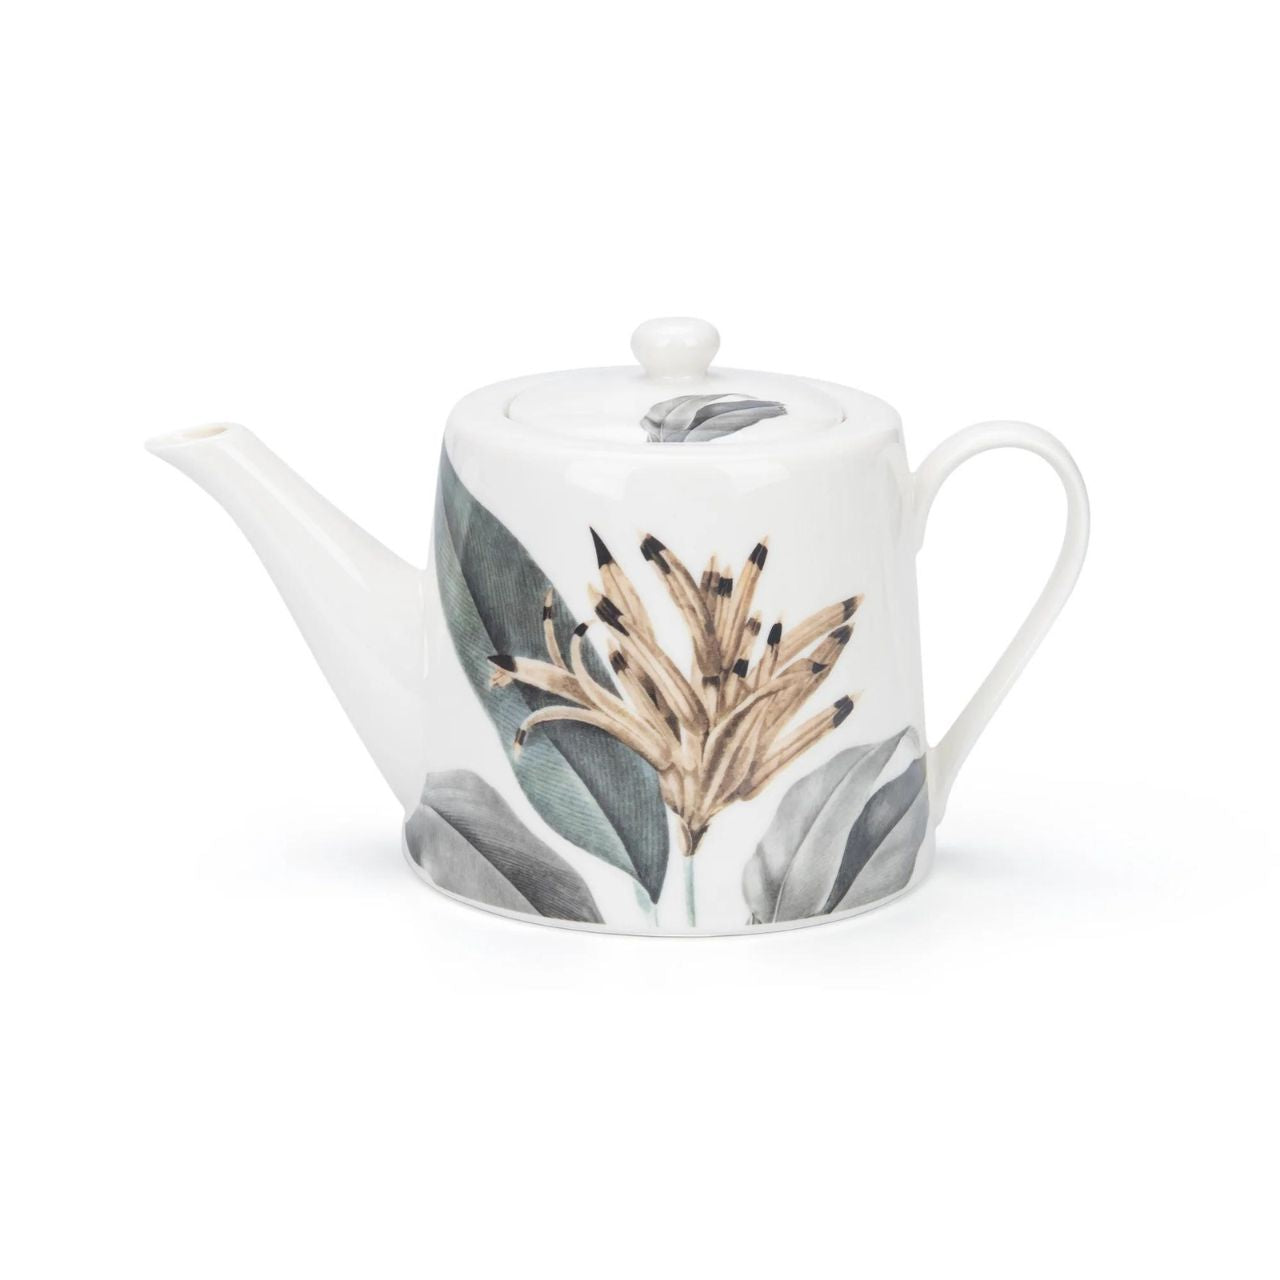 Birds of Paradise Tea Pot by Mindy Brownes Interiors  Latest addition to the Birds Of Paradise Tabletop Collection  - Inspired with classic shades of green, gold & grey. - Ideal house warming gift, new home, birthday, or general occasion.